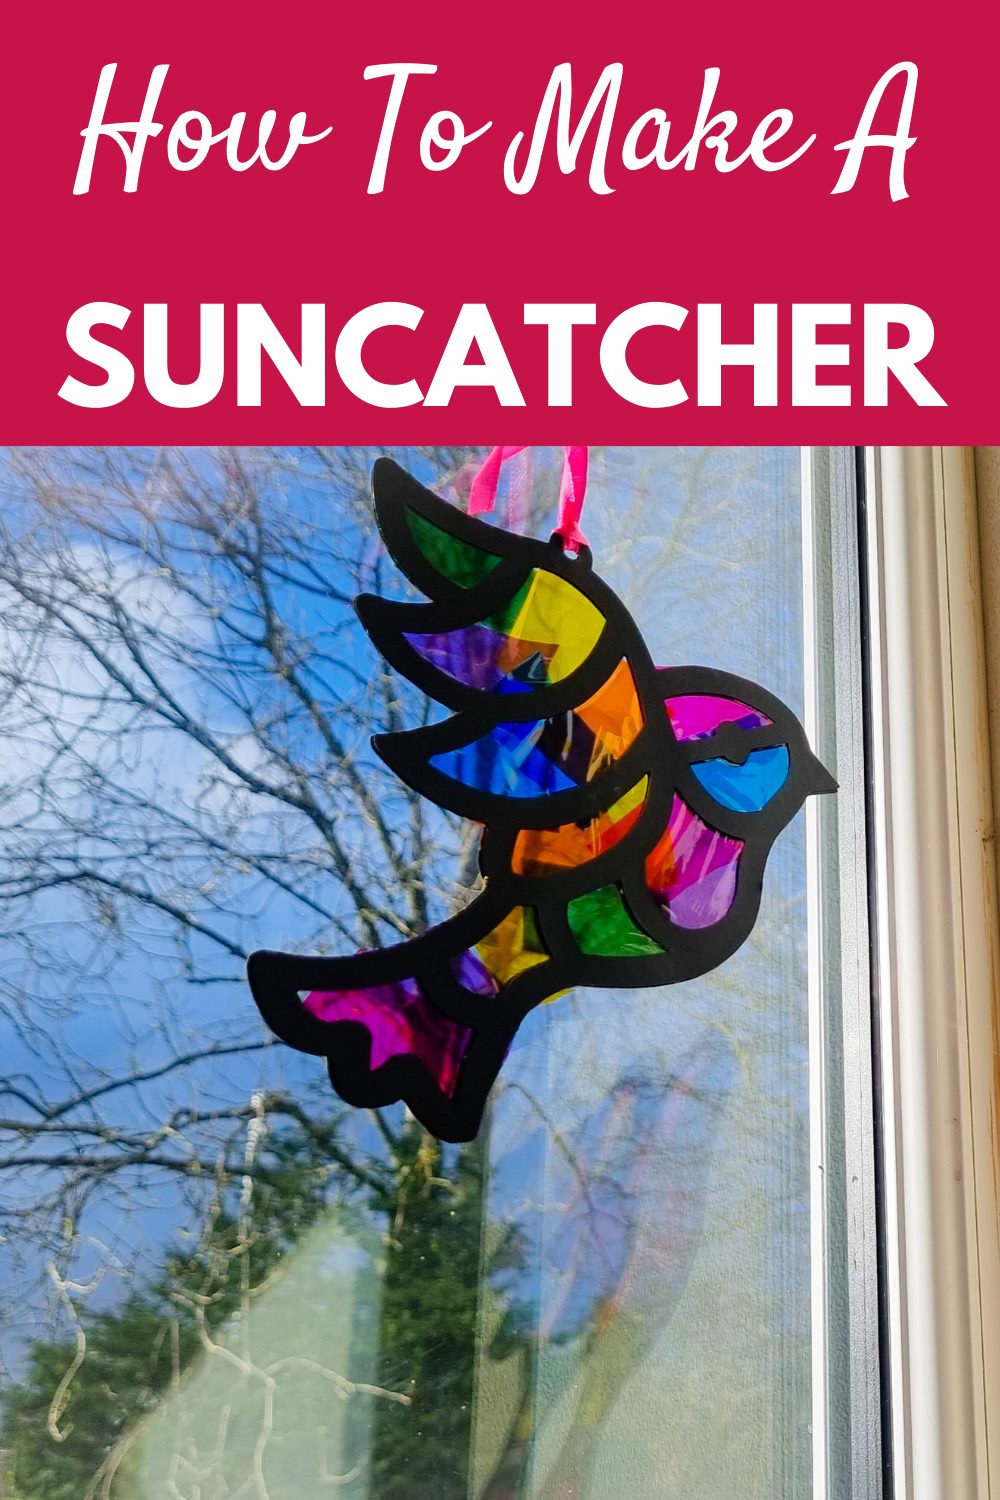 DIY suncatchers are easy to make & this beautiful stained glass effect suncatcher craft is sure to delight kids of all ages. Head to our site for full tutorial and tips! #suncatcher #diycrafts #diysuncatcher #kidscrafts #craftideas via @jennymelrose